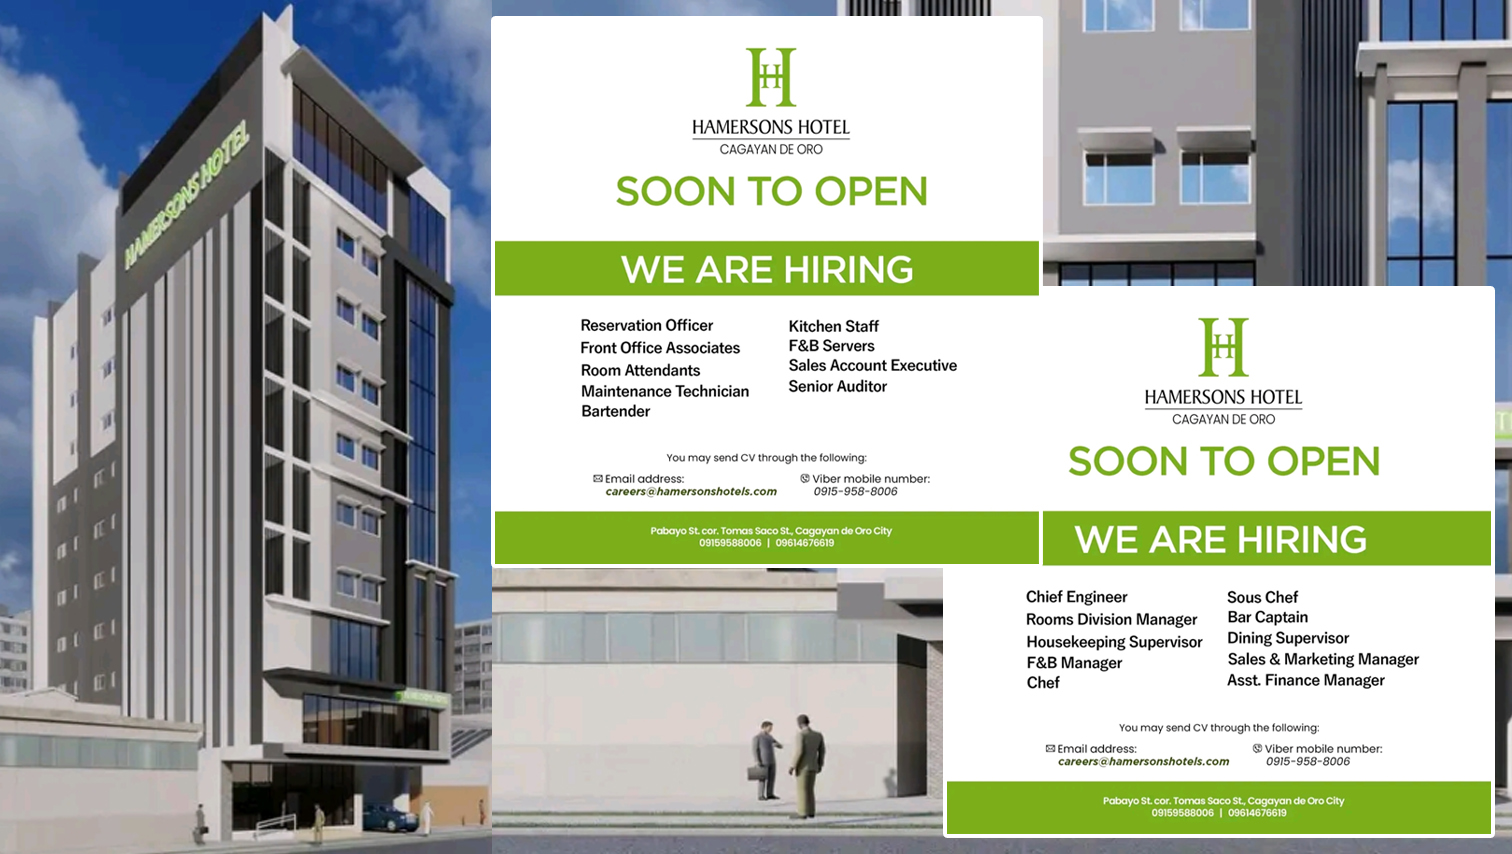 Hamersons Hotel Cagayan de Oro now hiring for its pre-opening team